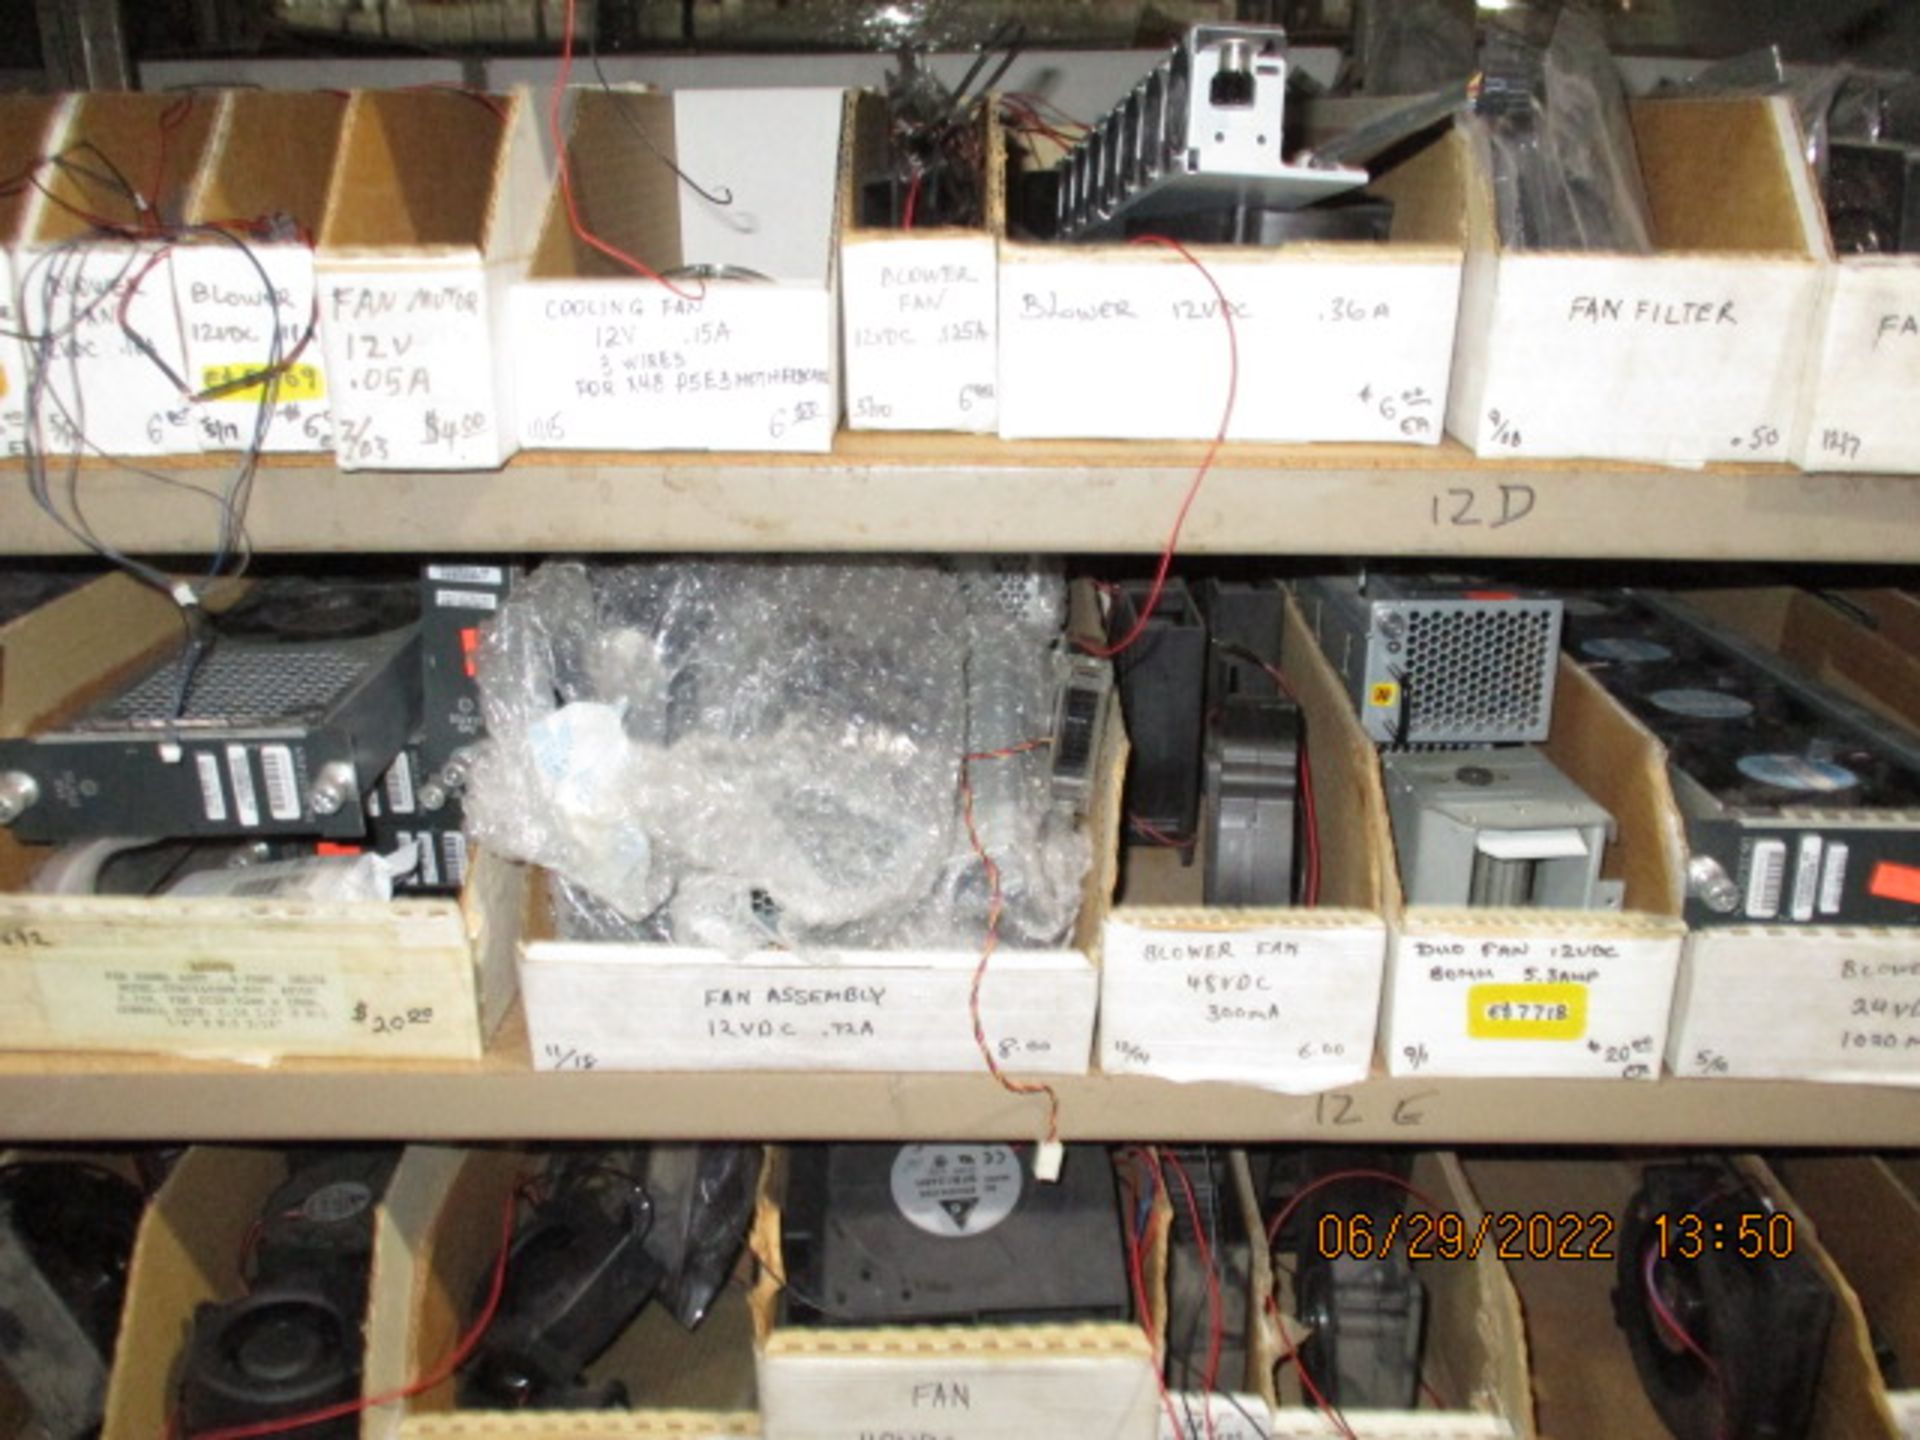 CONTENTS OF SHELVING UNIT CONSISTING OF ASSORTMENT OF FANS AND FAN ACCESSORIES - Image 6 of 13